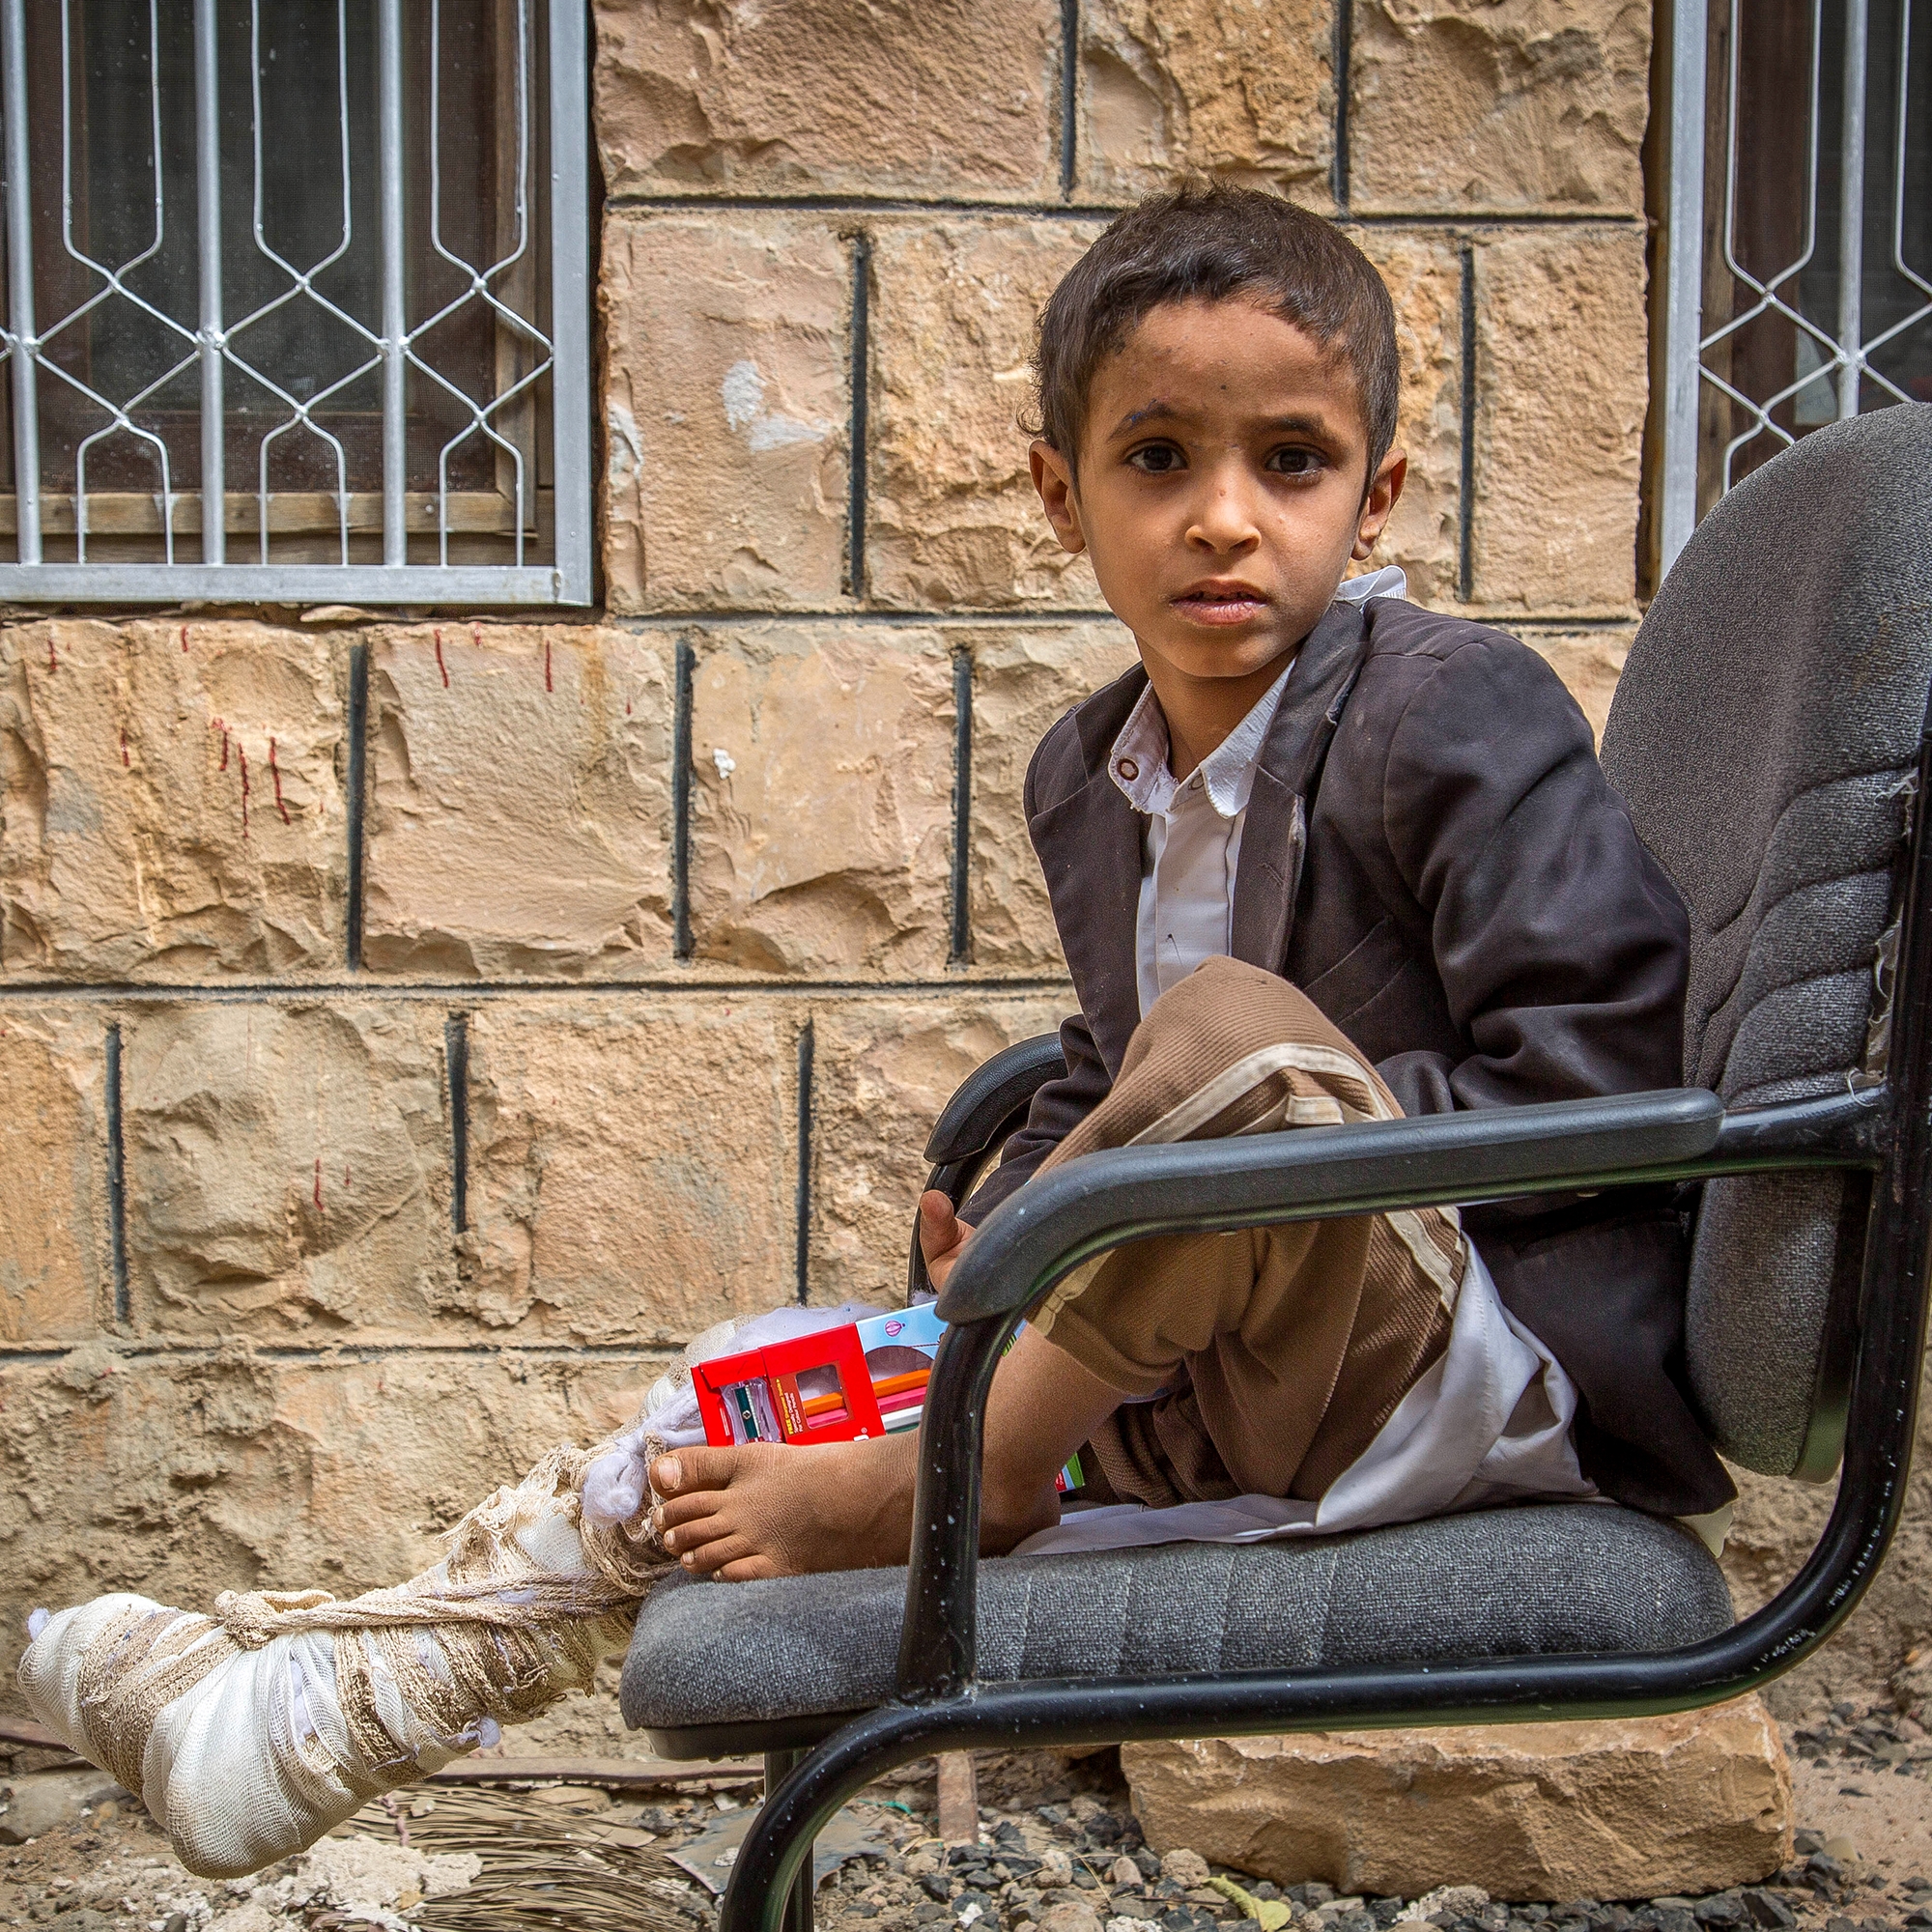 A young boy named Ismail sit on a chair outside a brick building with bars on the windows. The boy’s right leg is wrapped, from his toe to above his knee, in white bandages. The boy was on a school bus, riding through Yemen when his bus was bombed by an aircraft belonging to the SLC (Saudi-Led Coalition). Save the Children’s Stop the War on Children campaign draws attention to children living in conflict and calls on world leaders to take action to protect children living in war zones. Photo credit: Mohammed Awadh / Save the Children, Sept 2018. 